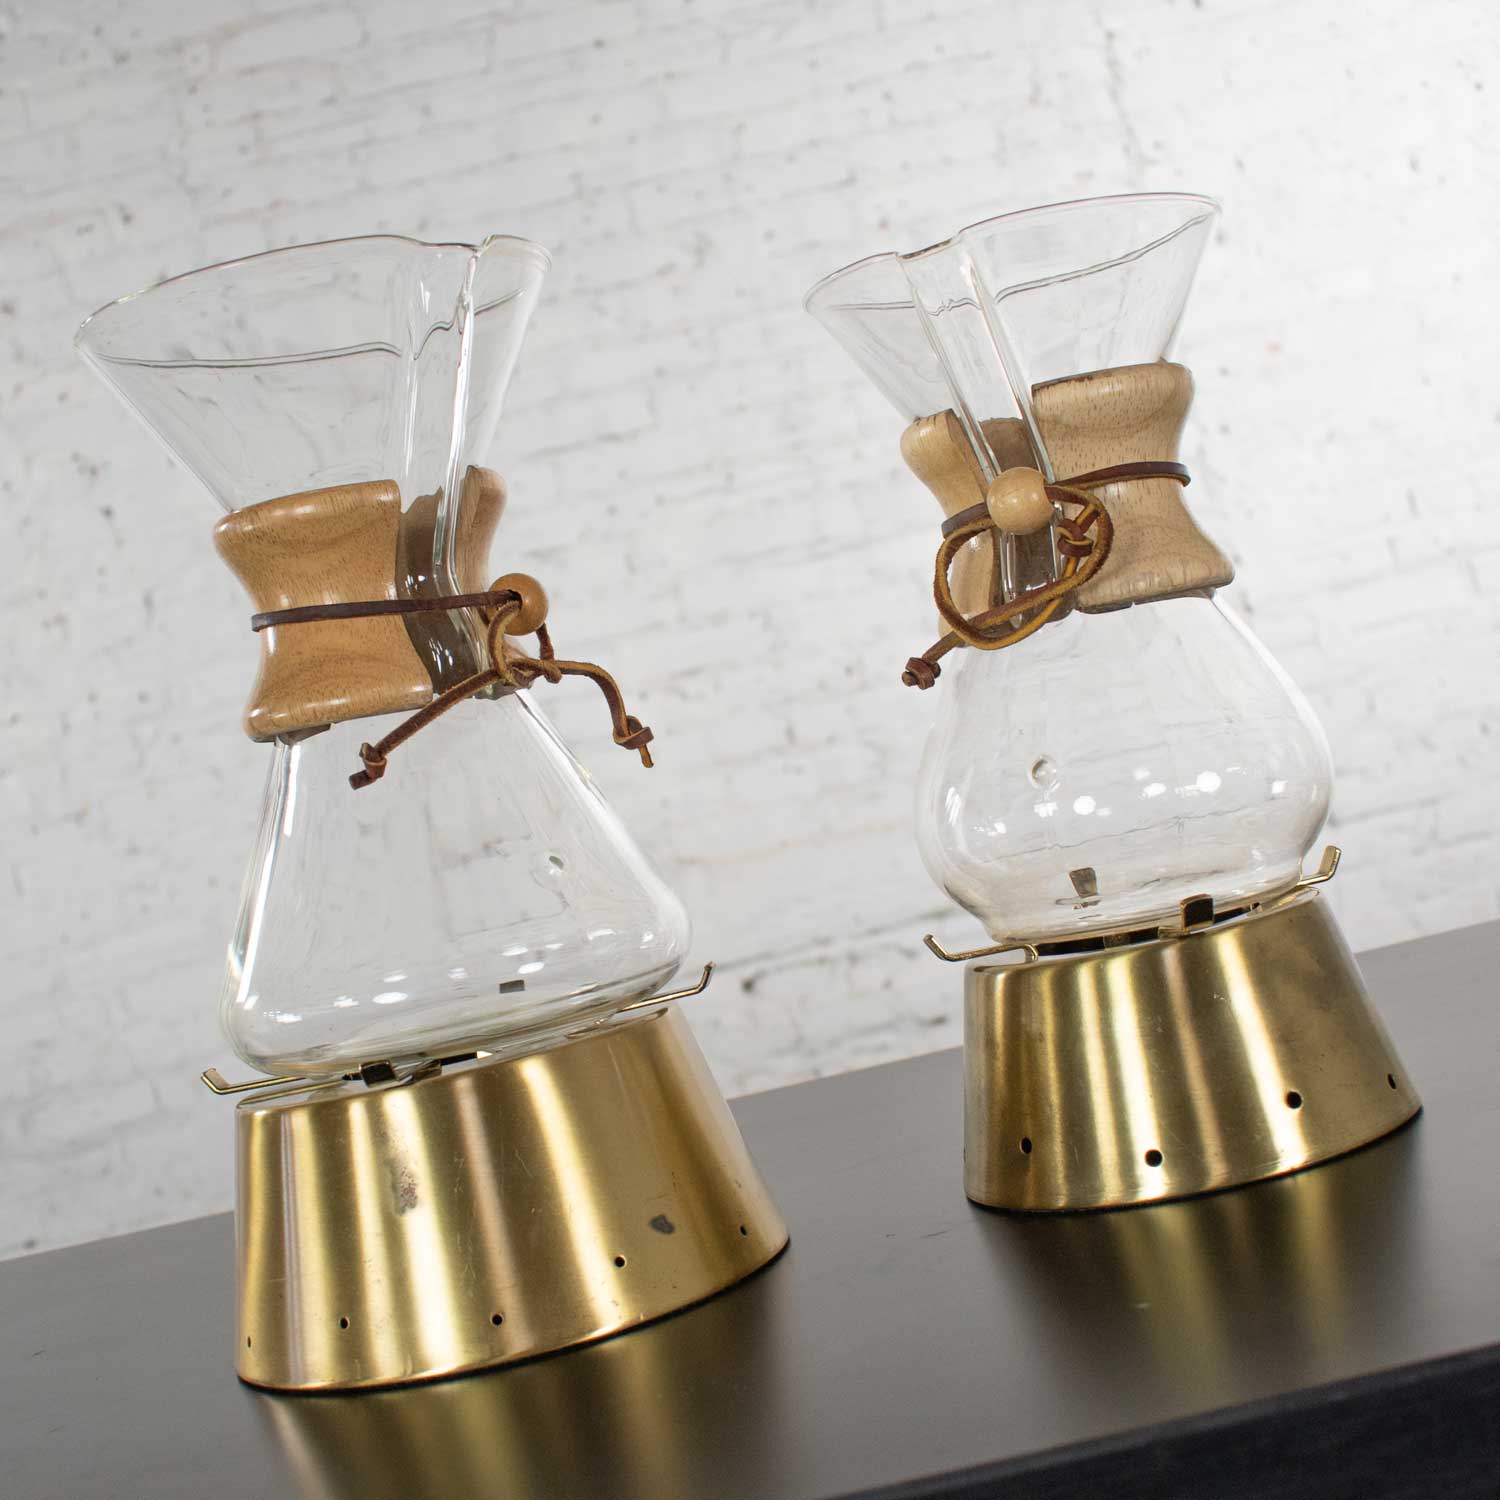 2 Mid Century Modern Chemex Pour Over Coffeemakers by Peter Schlumbohm & Vintage Brass Warmers